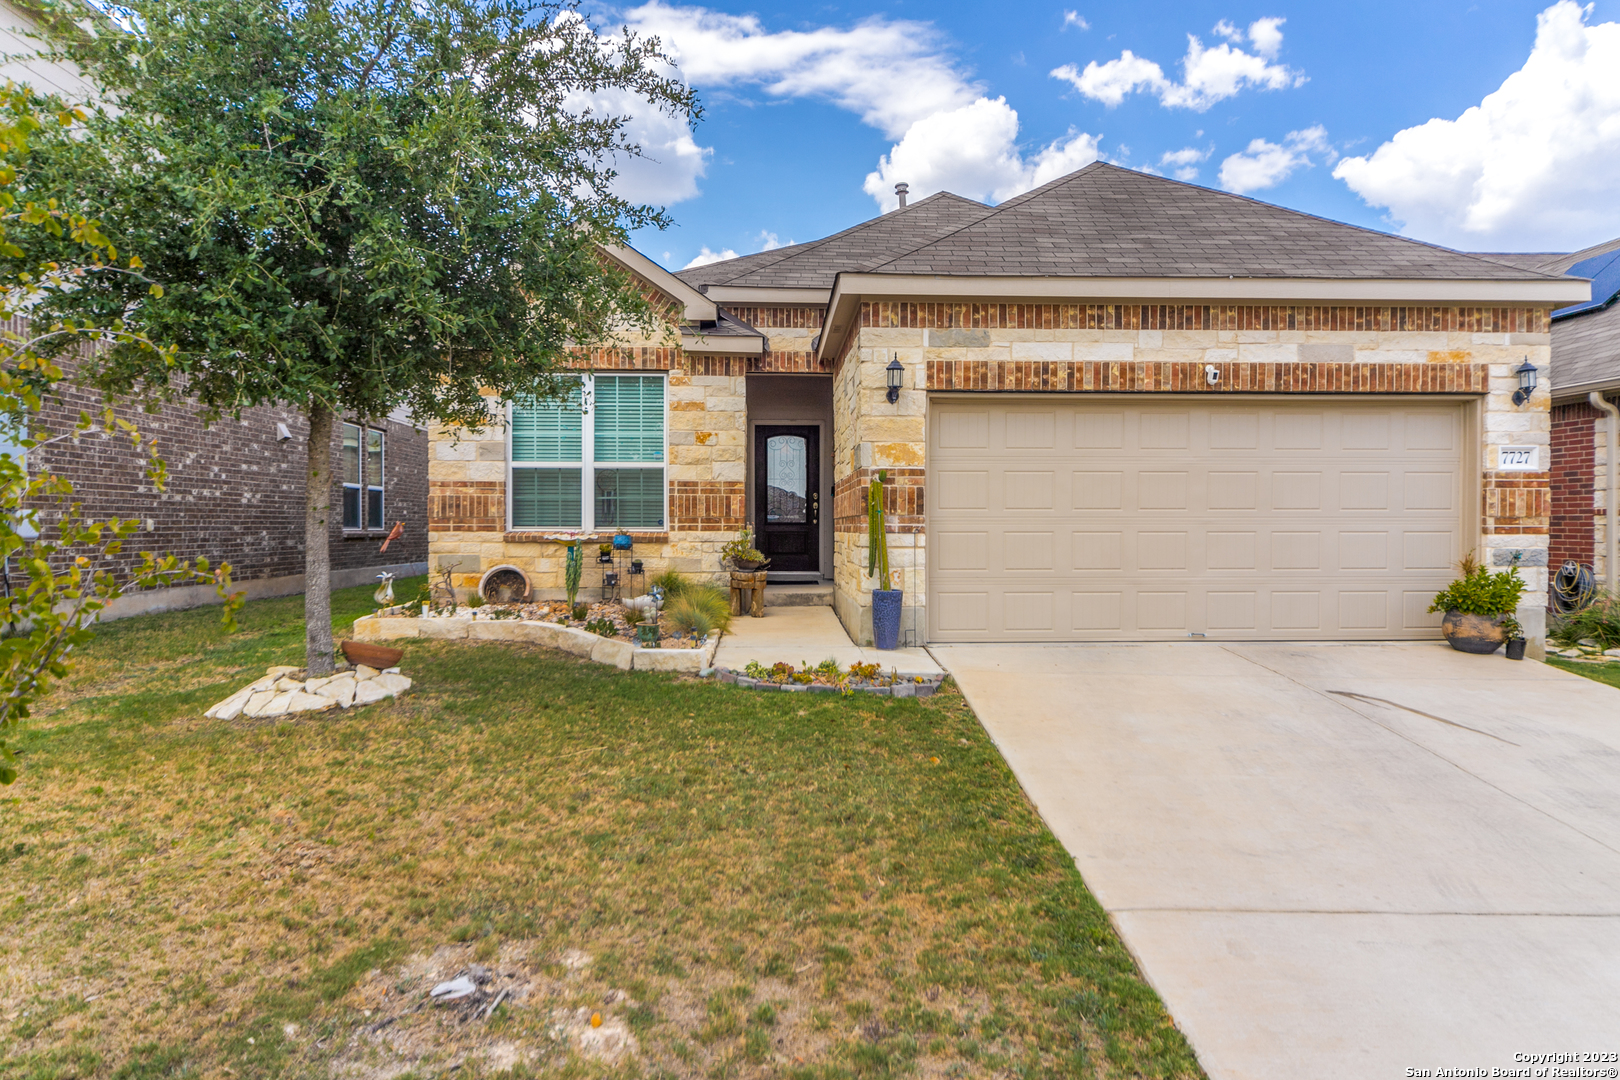 Photo of 7727 Paraiso Crst in Boerne, TX